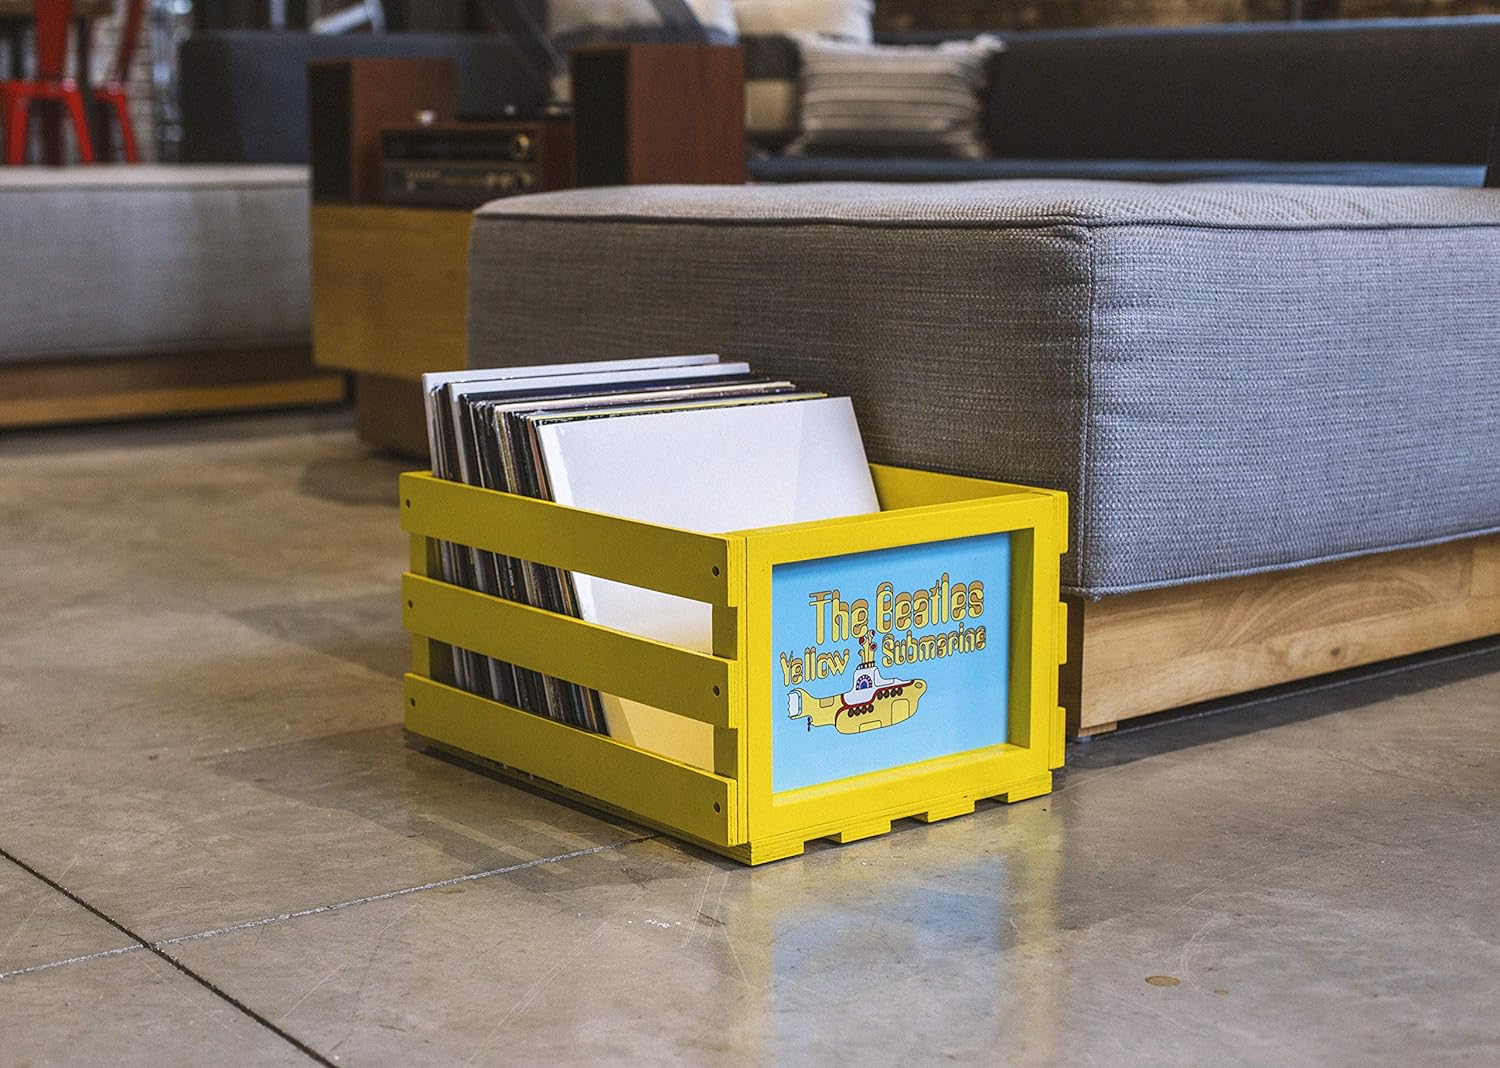 The Beatles Yellow Submarine - Crosley Vinyl Record Storage Crate Holds up to 75 Albums - Free Tracked Shipping